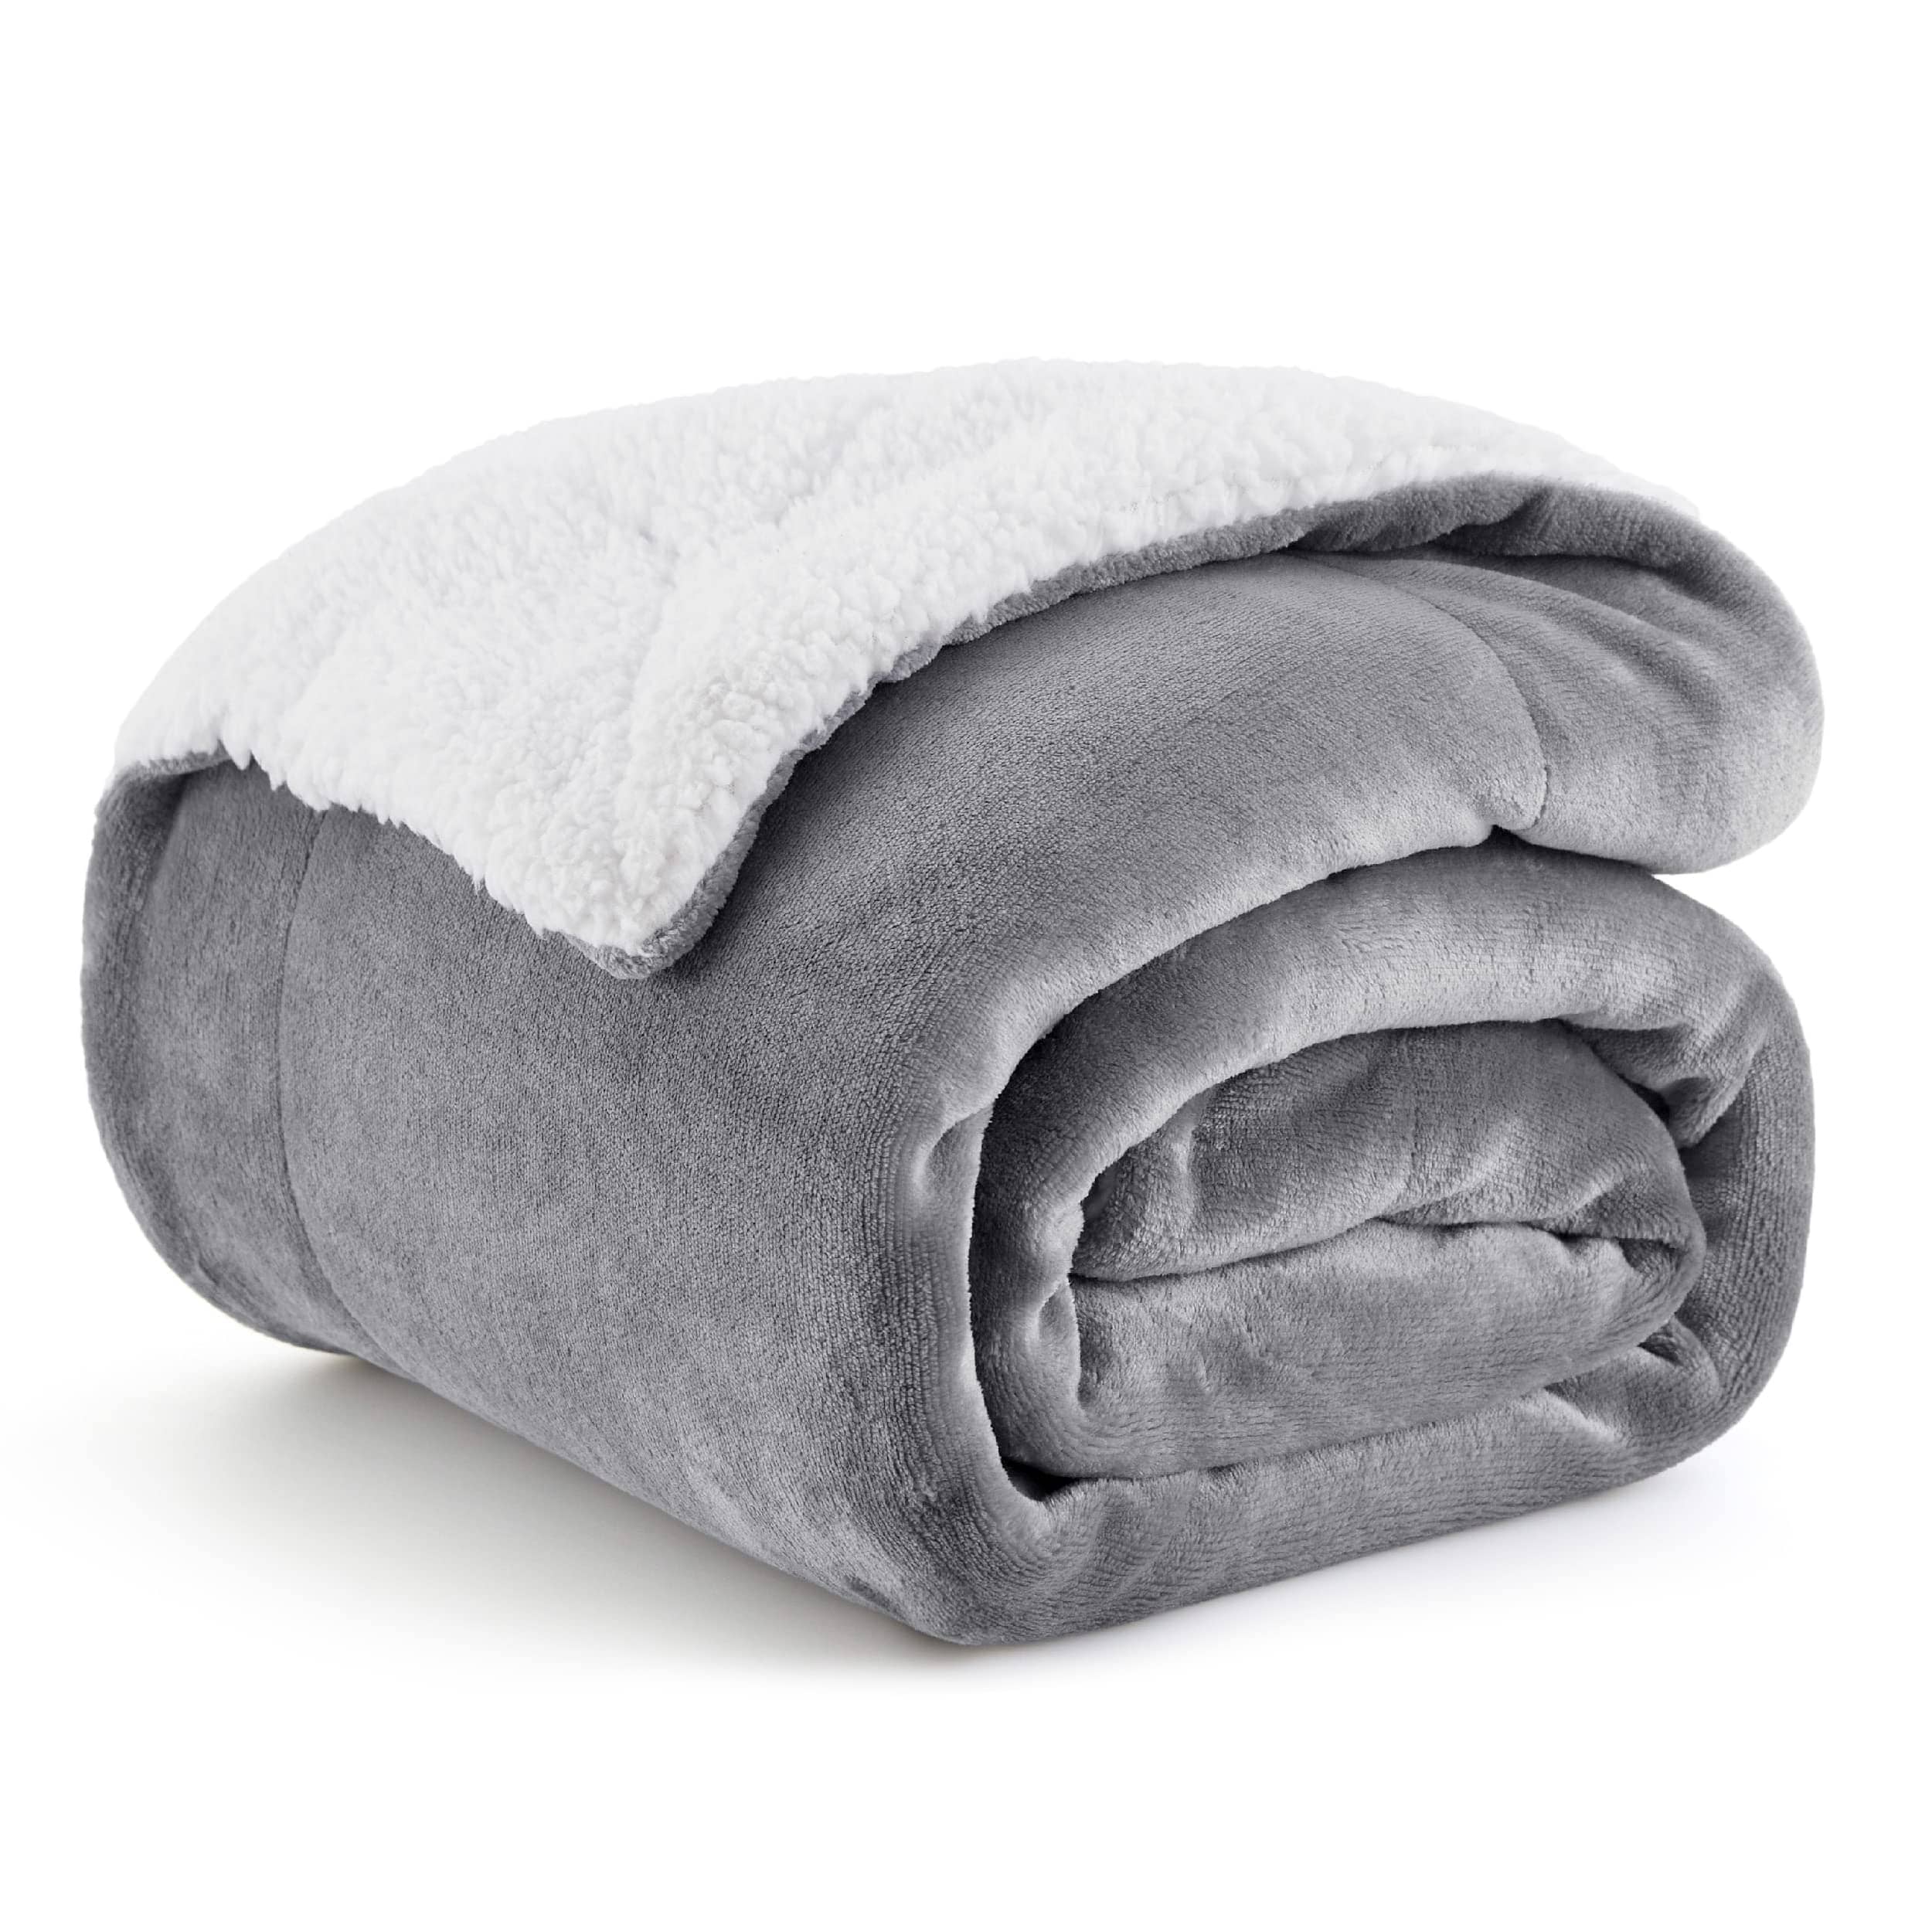 Bedsure Sherpa Fleece Queen Size Blankets for Bed - Thick and Warm for  Winter, Soft and Fuzzy Fall Blanket , Navy, 90x90 Inches